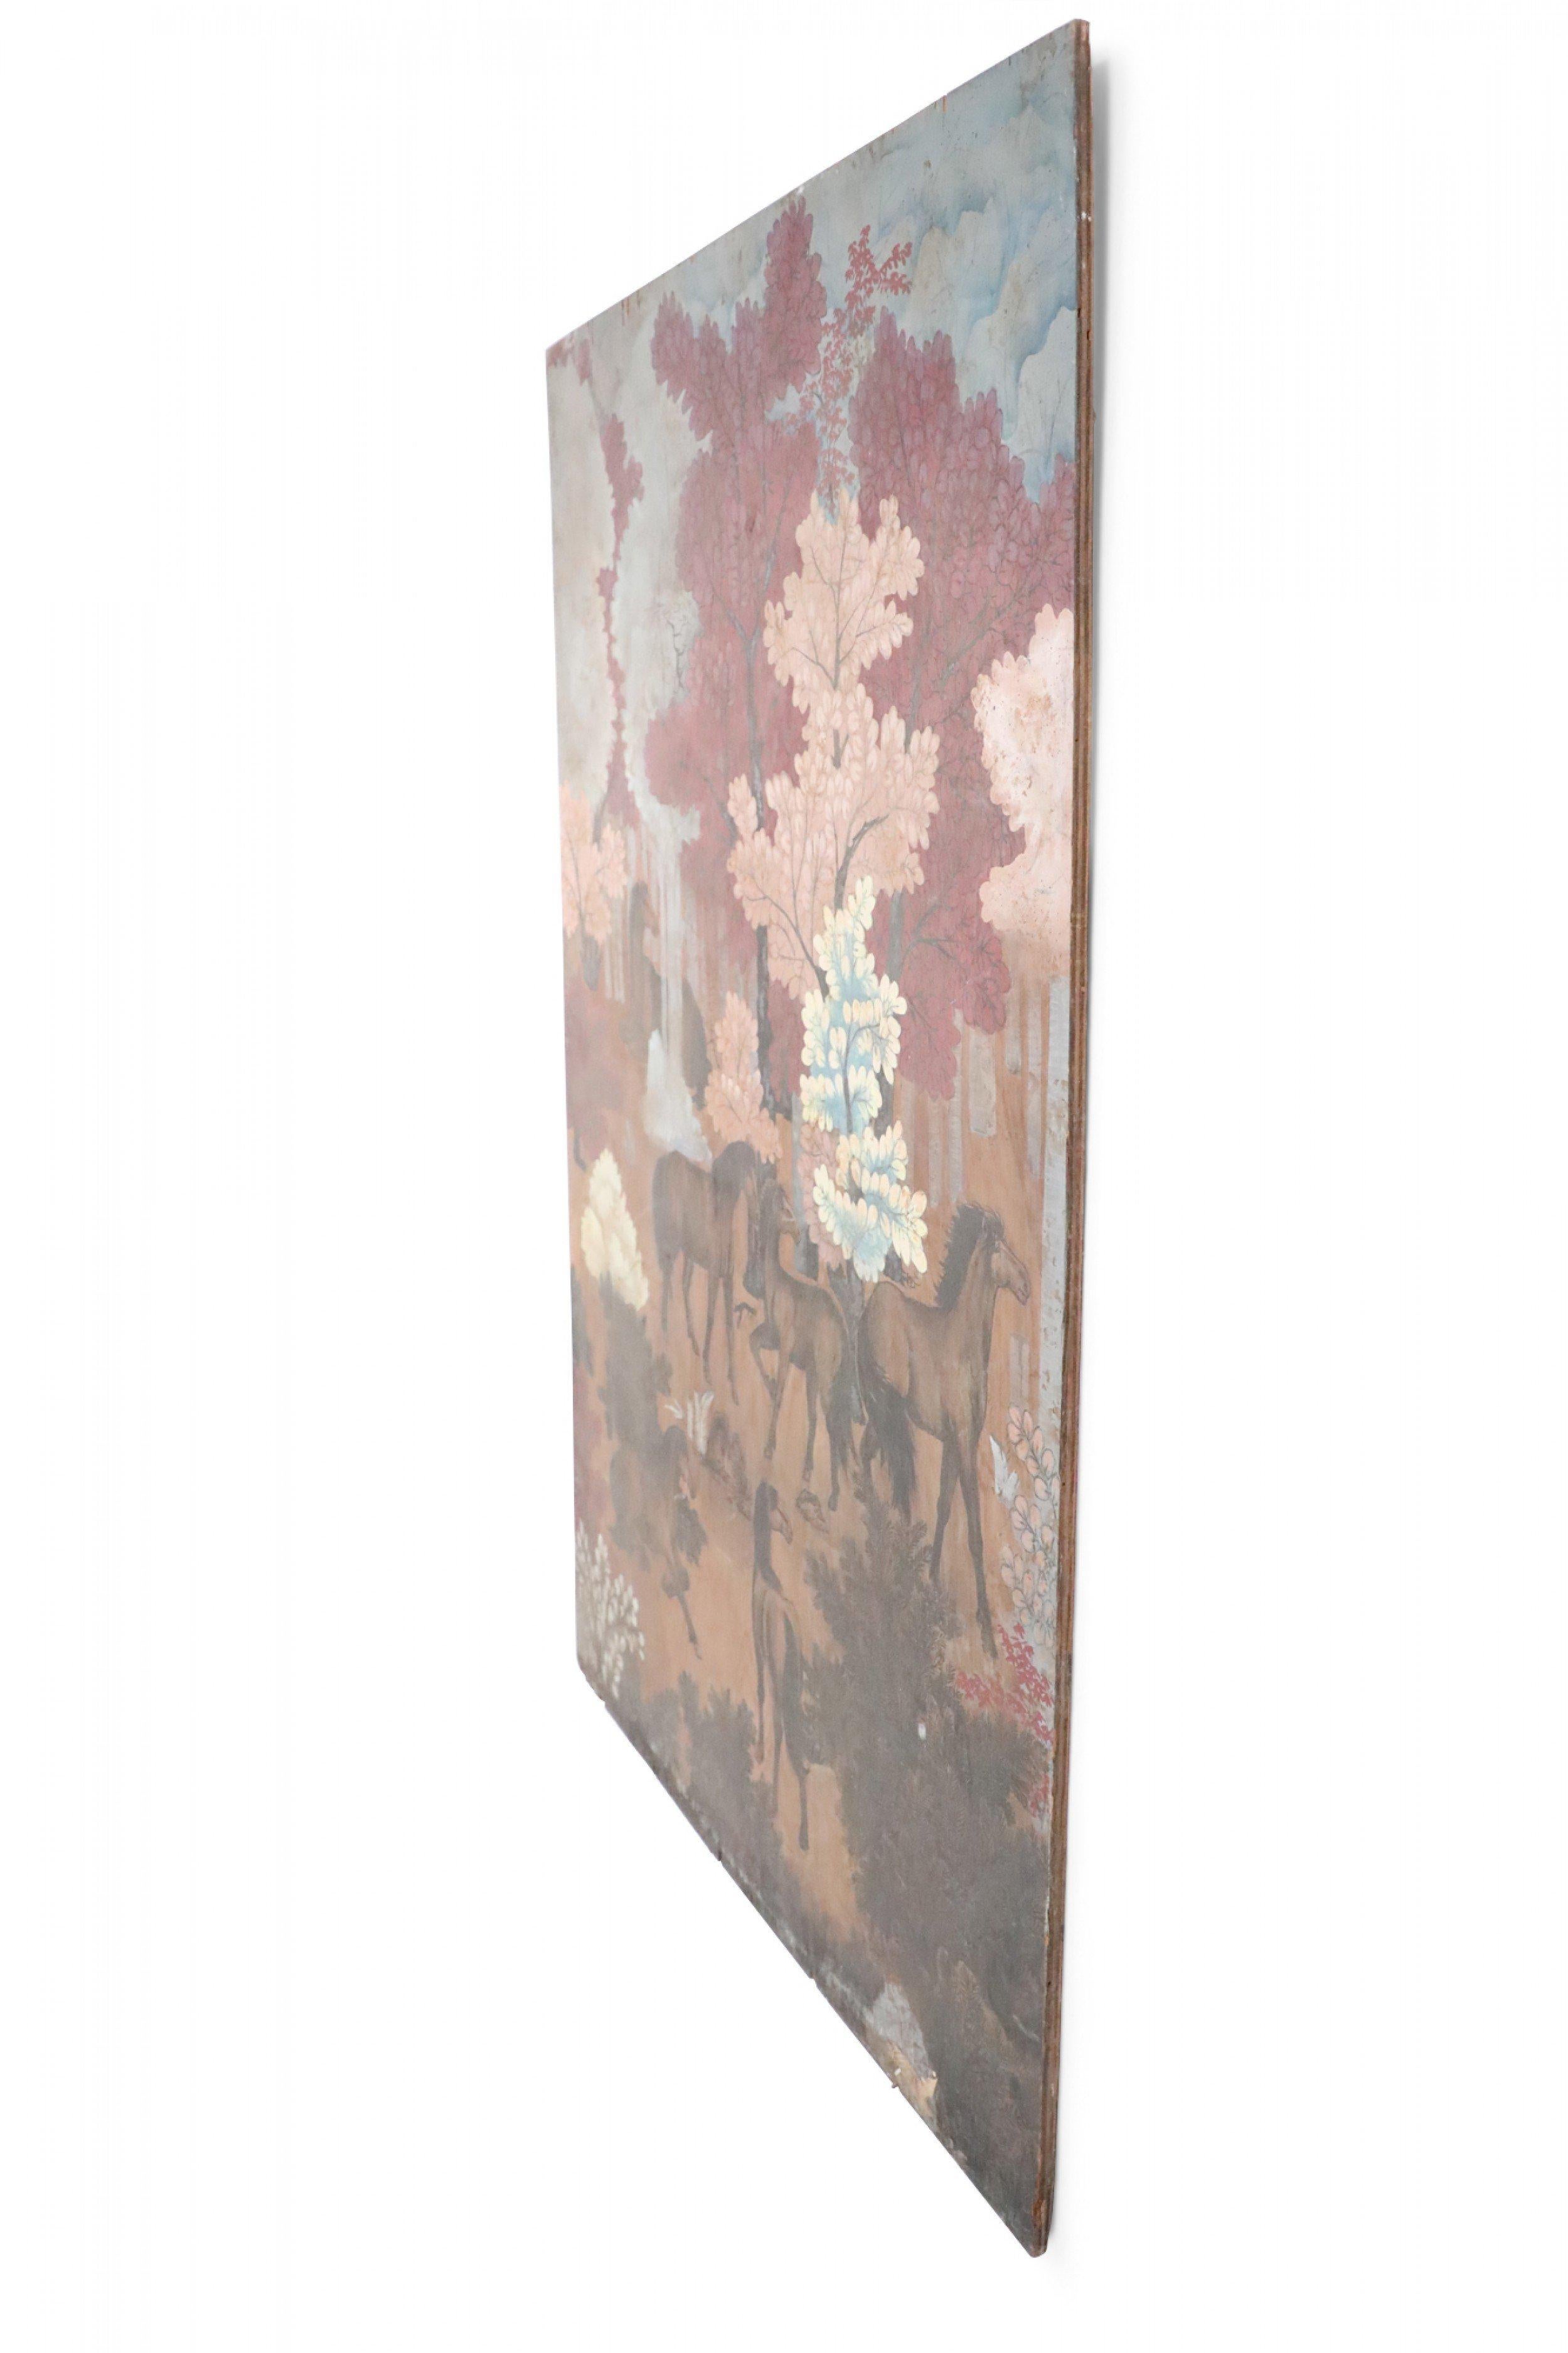 Vintage (20th Century) painting on wood depicting a group of horses gathered in a forest of red, peach, white and light blue trees, and a forest floor captured by allowing woodgrain to show in unpainted areas.